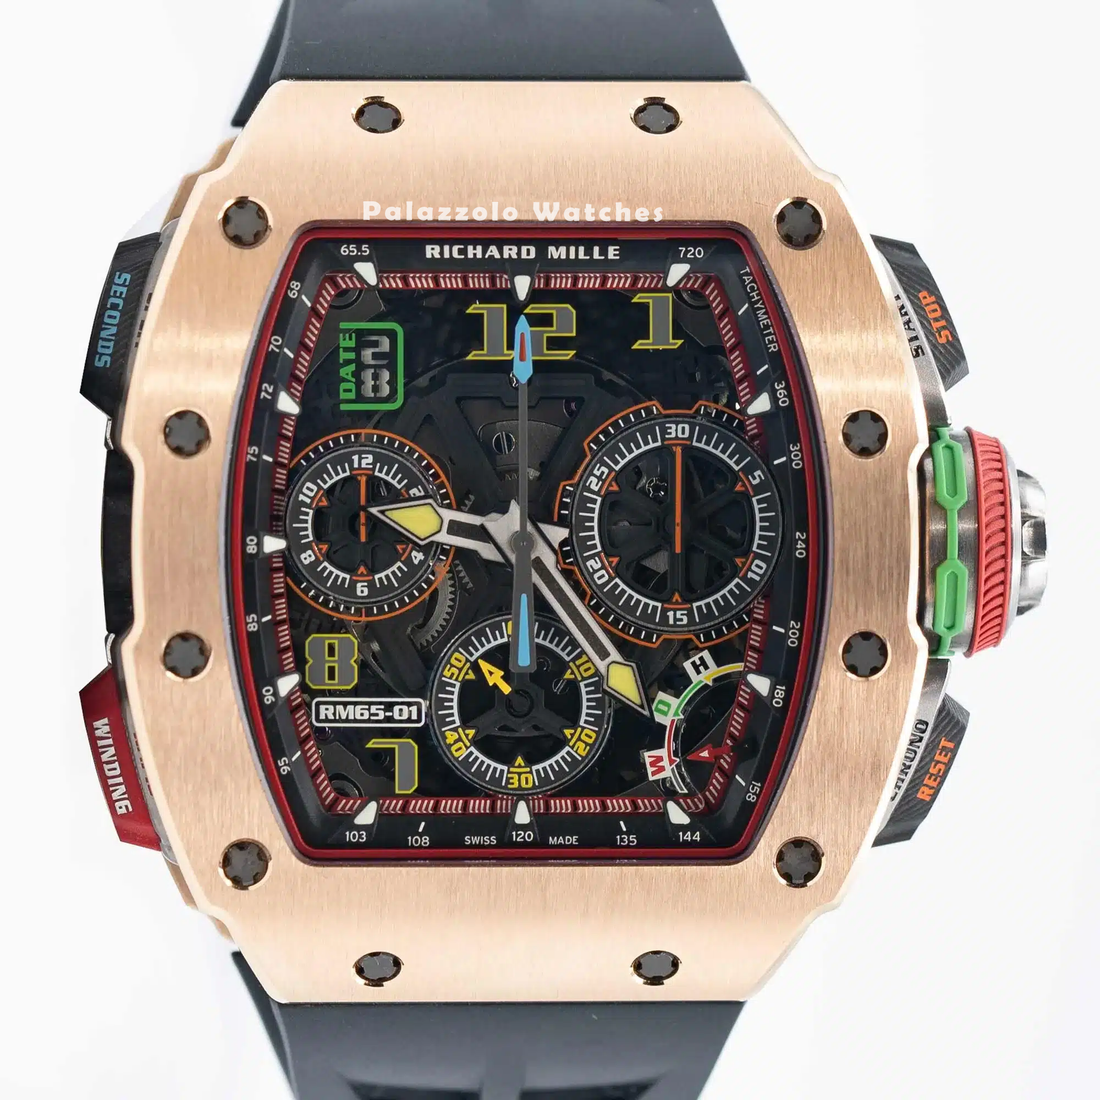 Richard Mille RM 65-01 Rose Gold & Carbon - Palazzolo Watches